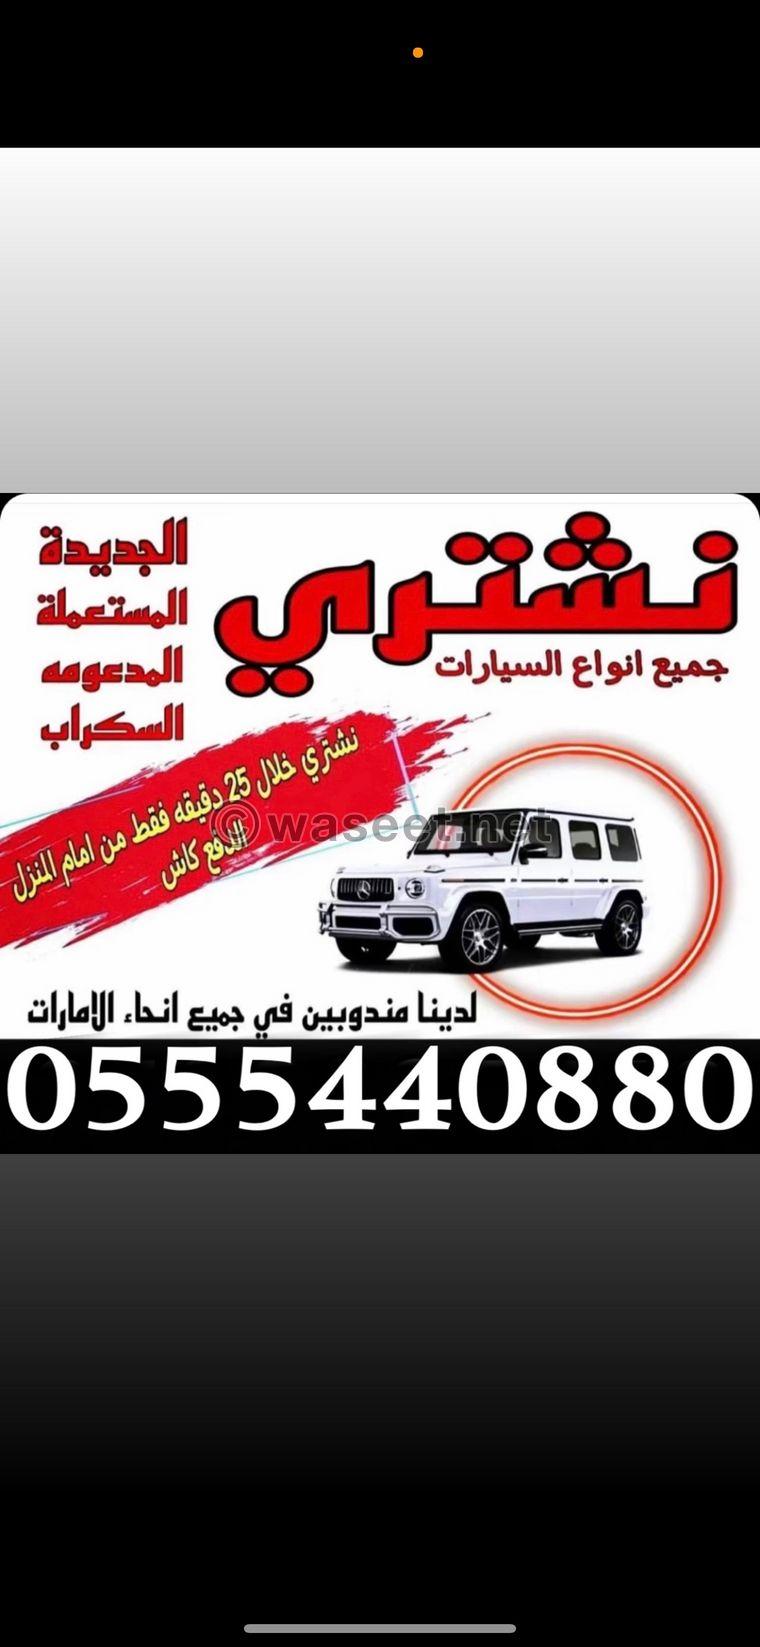 We buy all types of cars at the best prices 0